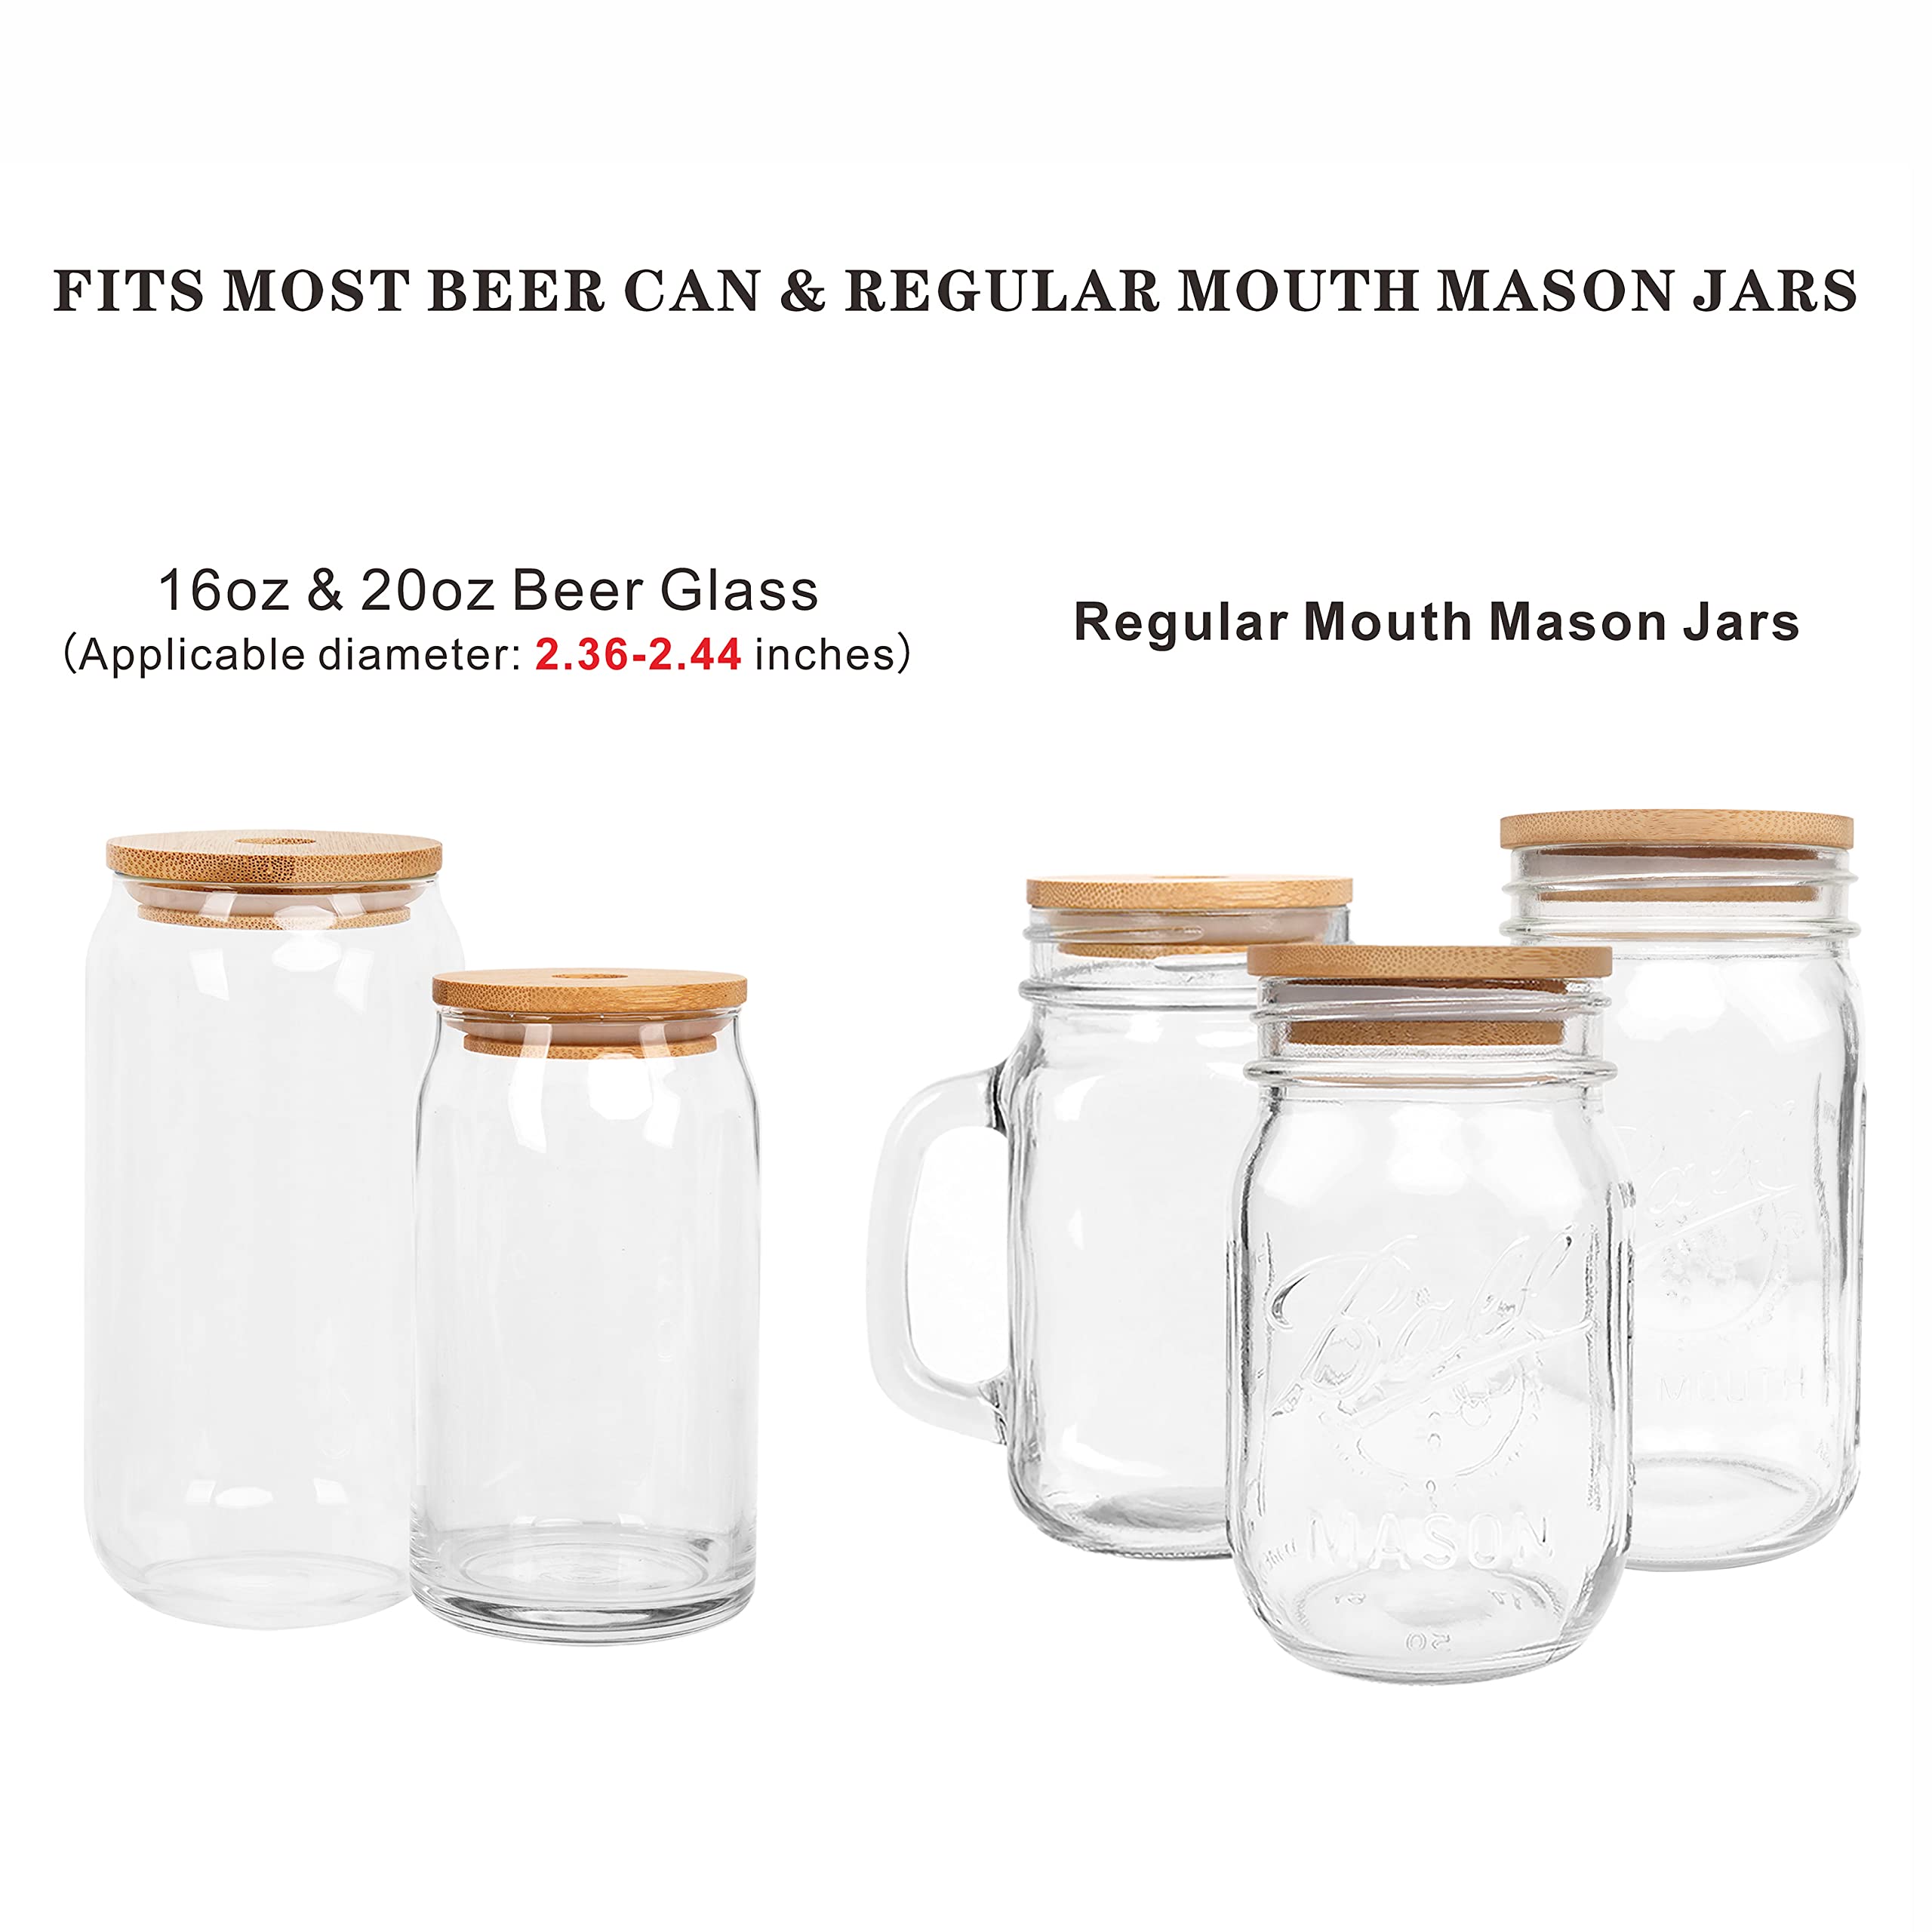 Bamboo Lids for Beer Can Glass, ANOTION Mason Jar Lids with Straw Hole, 4 Reusable Bamboo Mason Jar Drinking Lids for Regular Mouth Mason Jar with 4 Muti-Color Glass Straw for Coffee Boba Cup